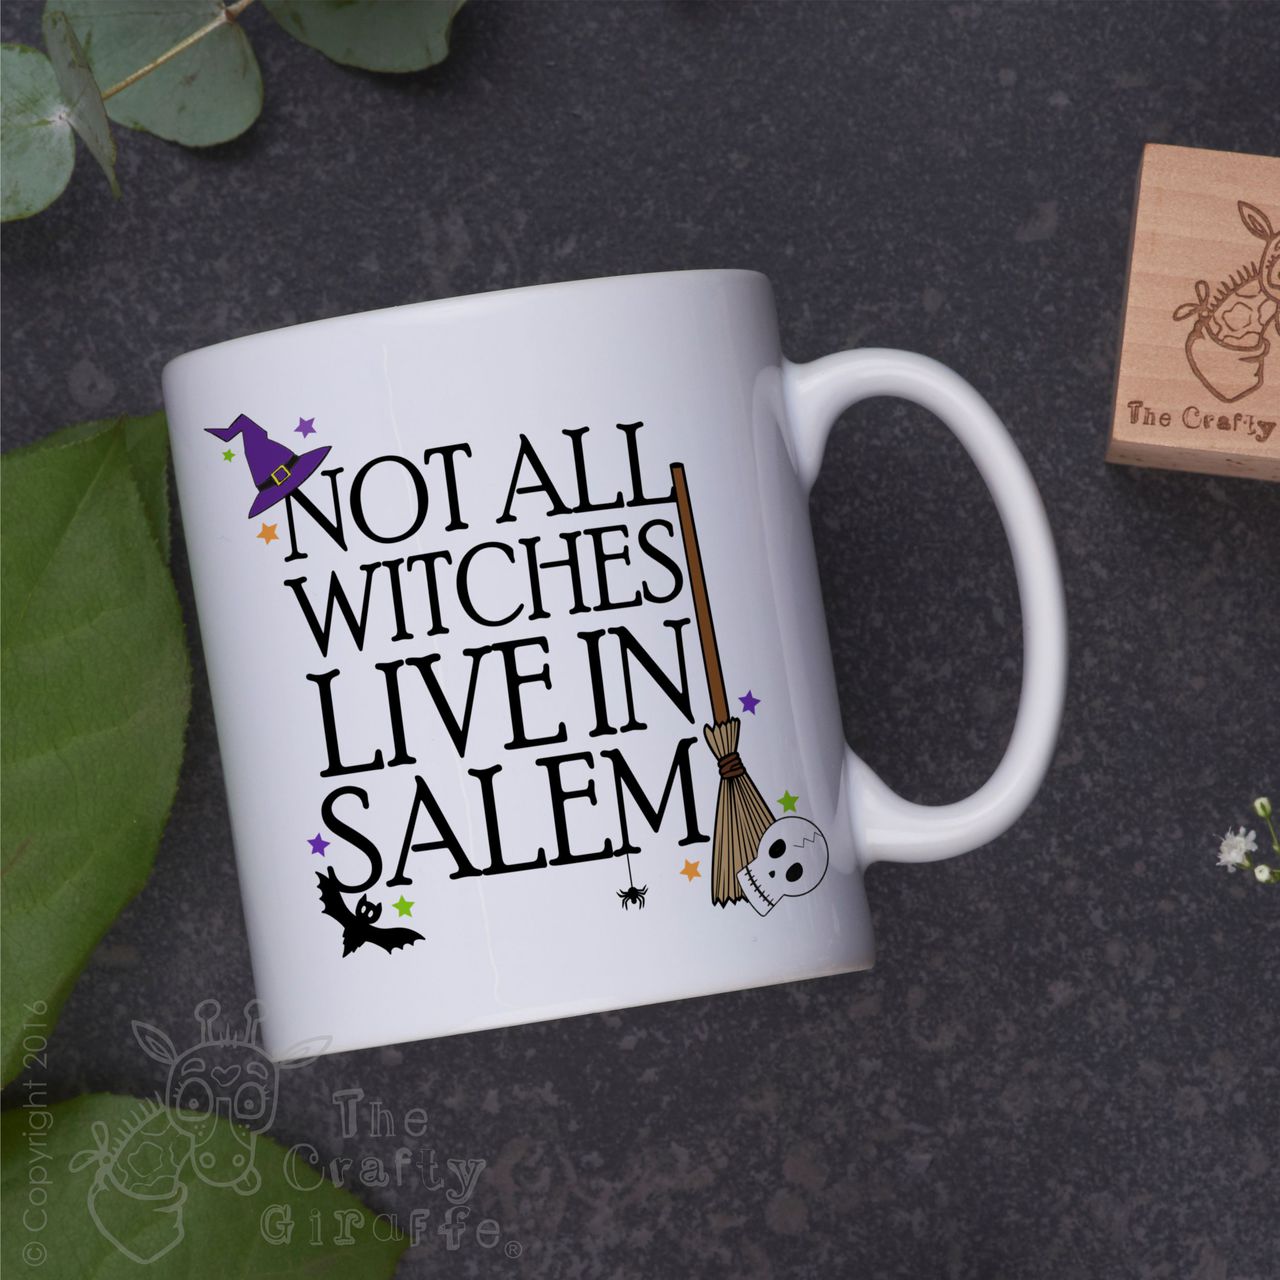 Not all witches live in salem Mug